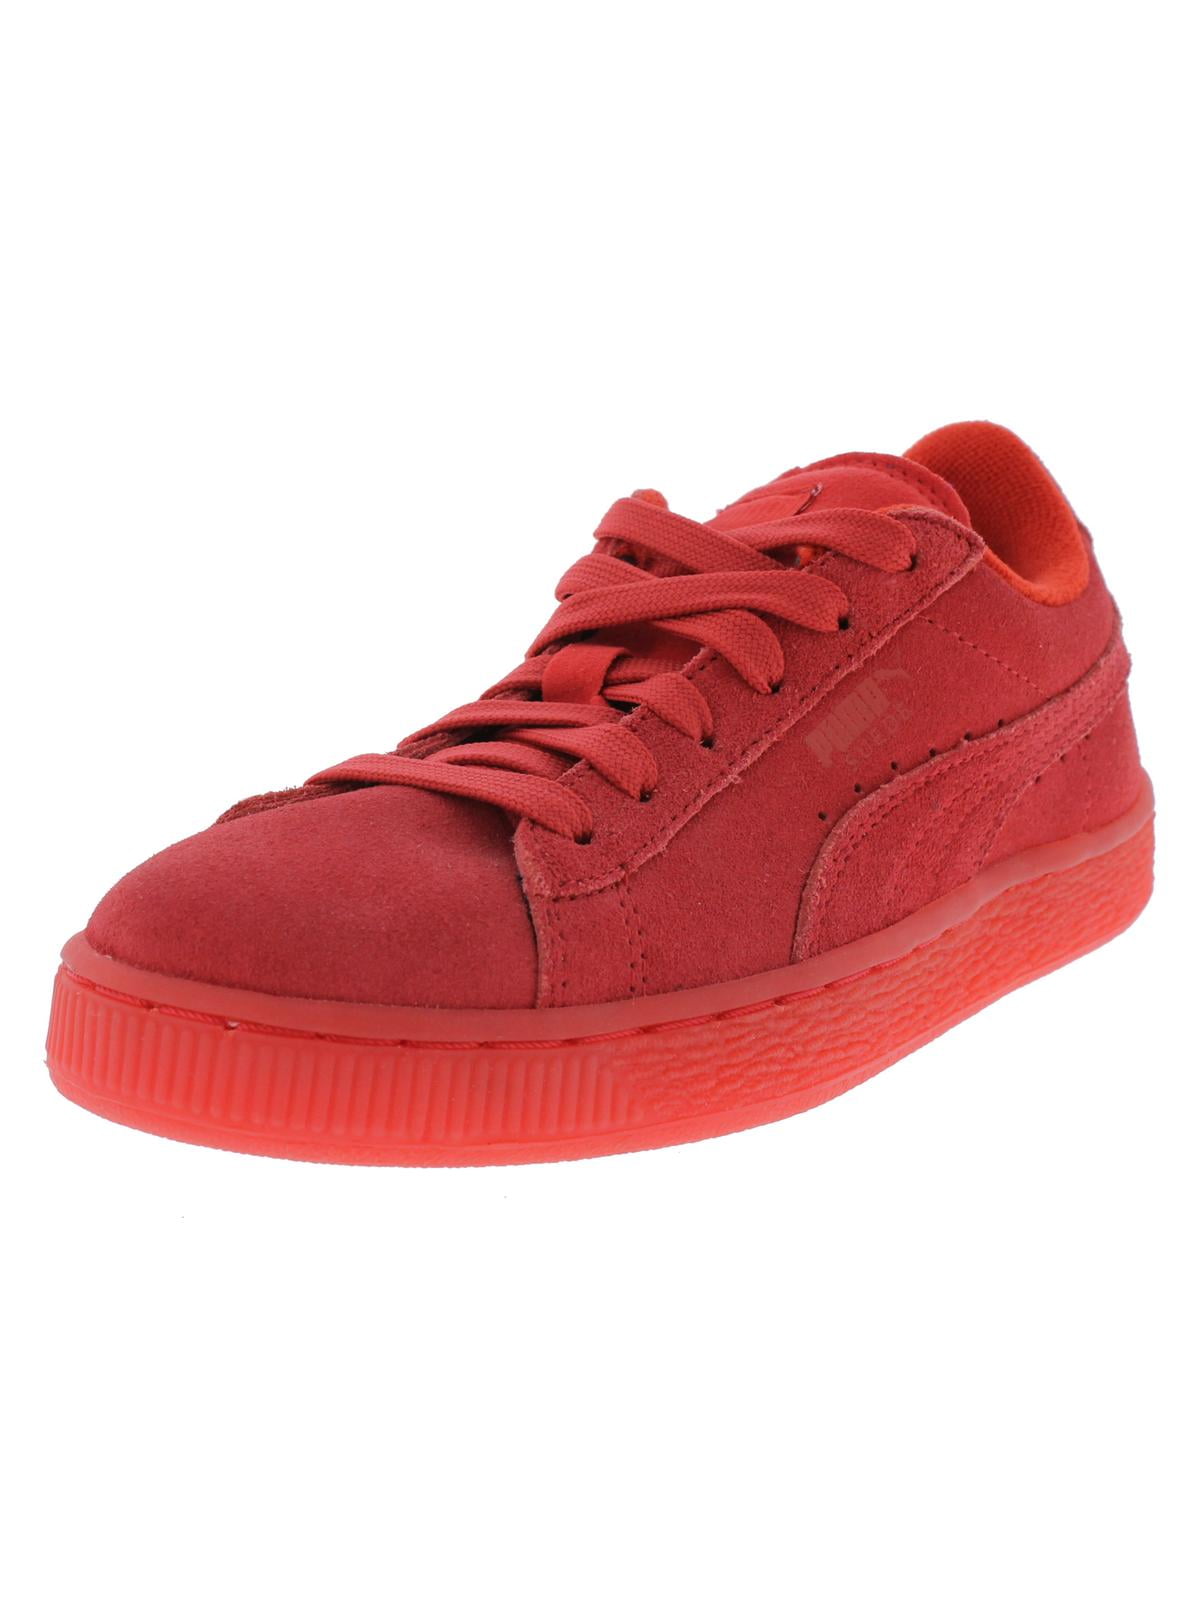 puma suede iced red